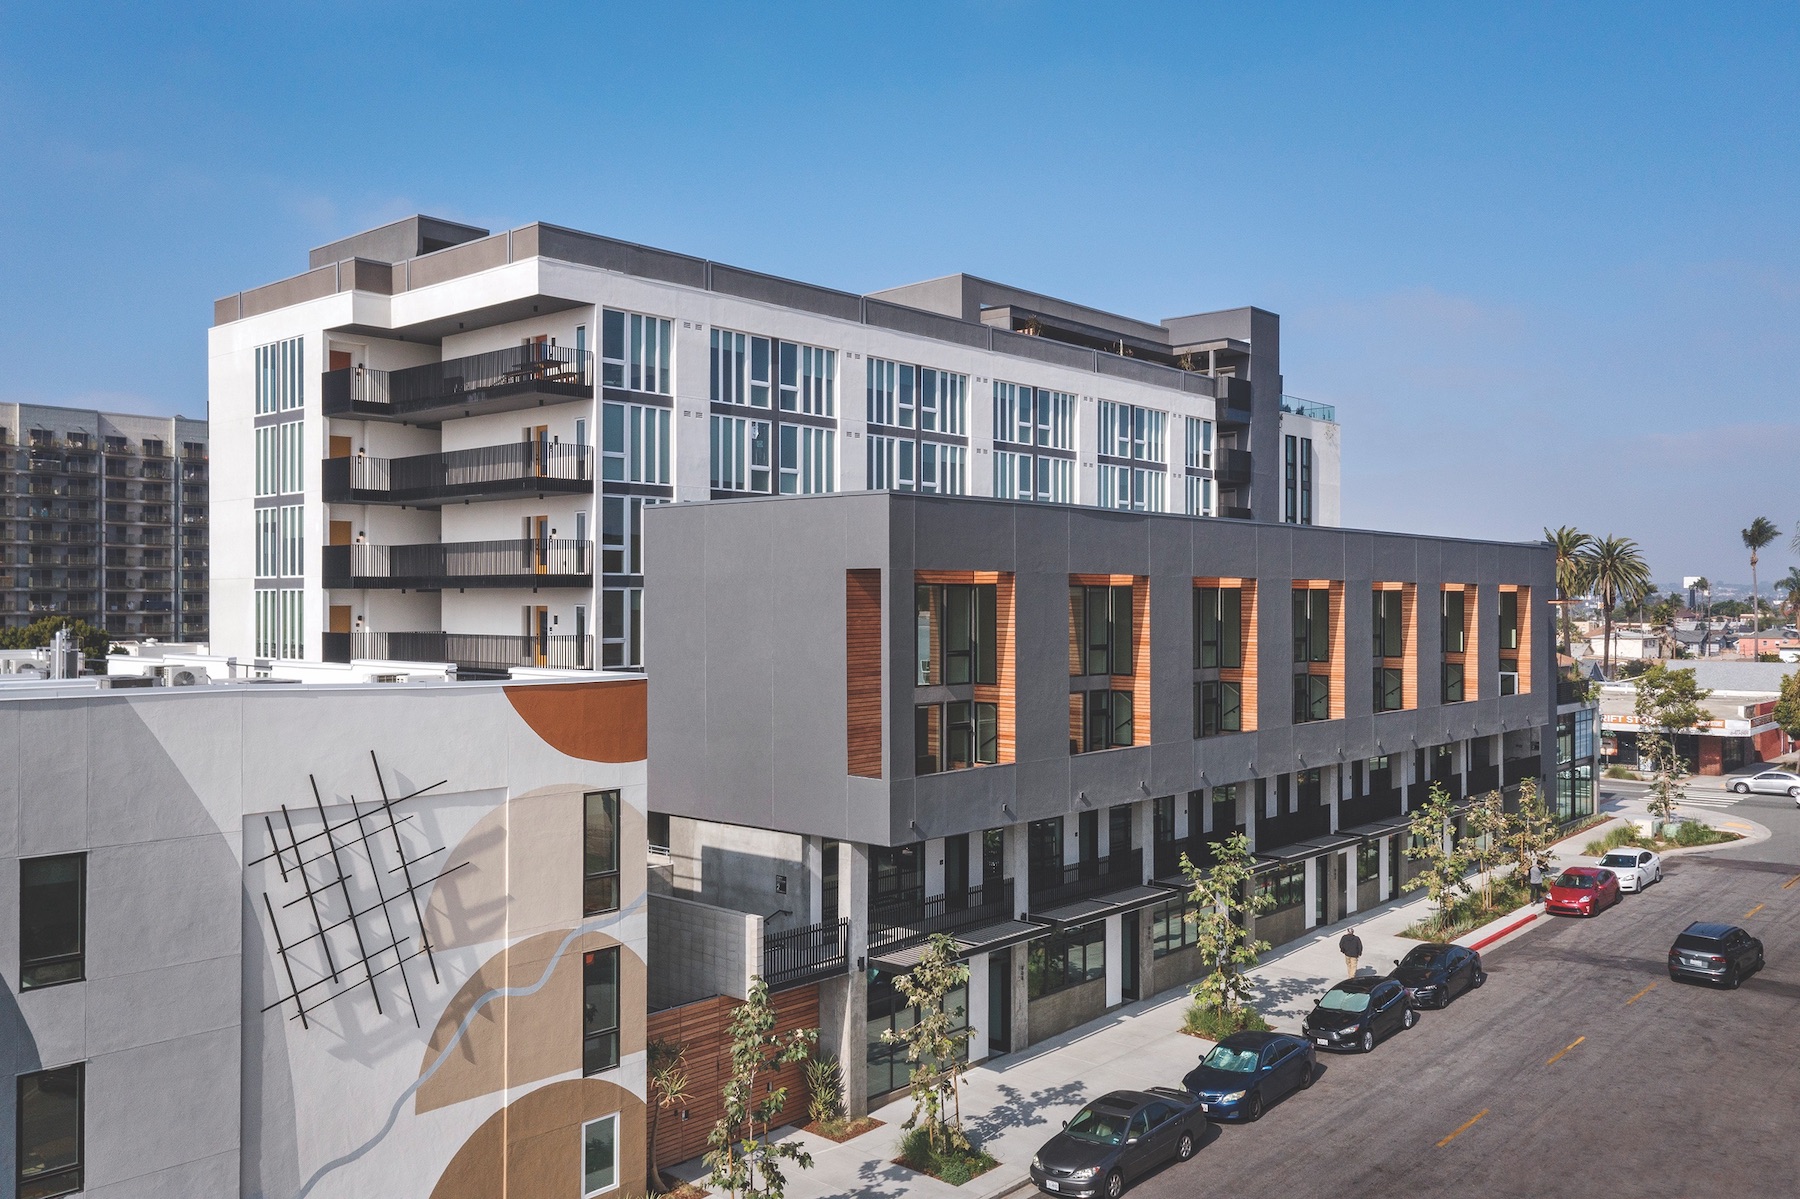 8 Parco San Diego, 9 noteworthy multifamily developments for 2022, Chipper Hatter